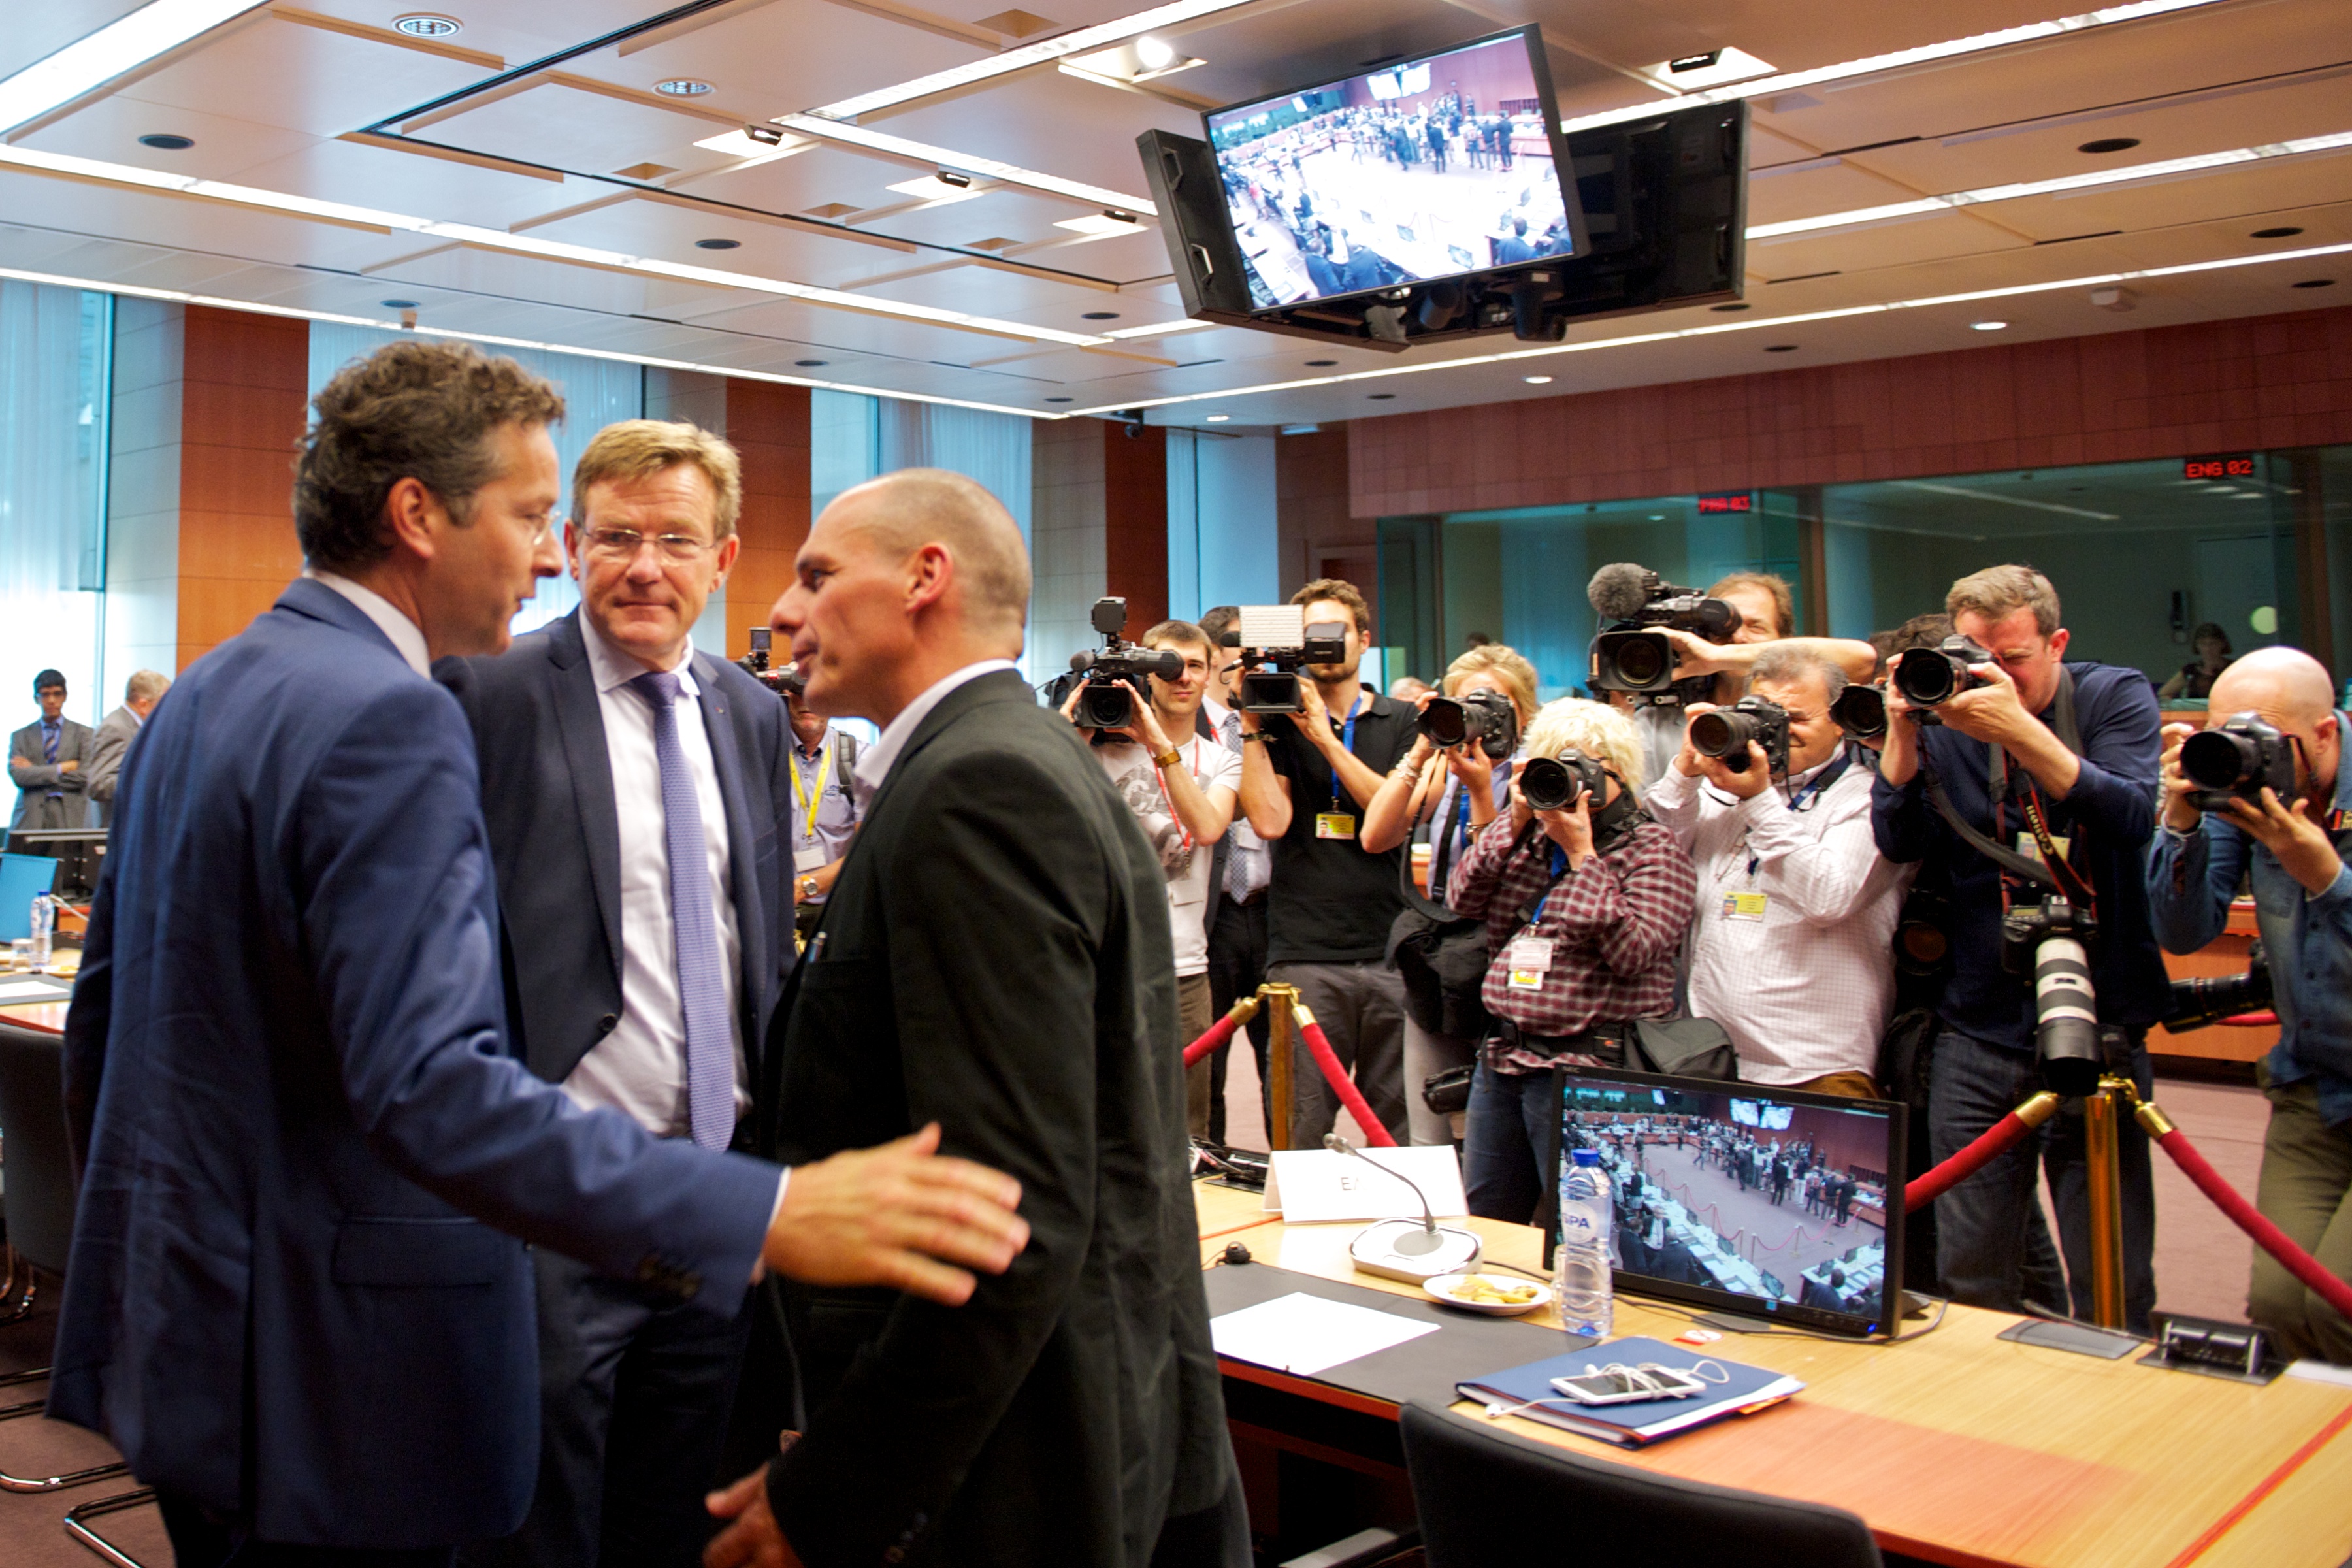 Brussels: The ball for an agreement lies in Athens’ court